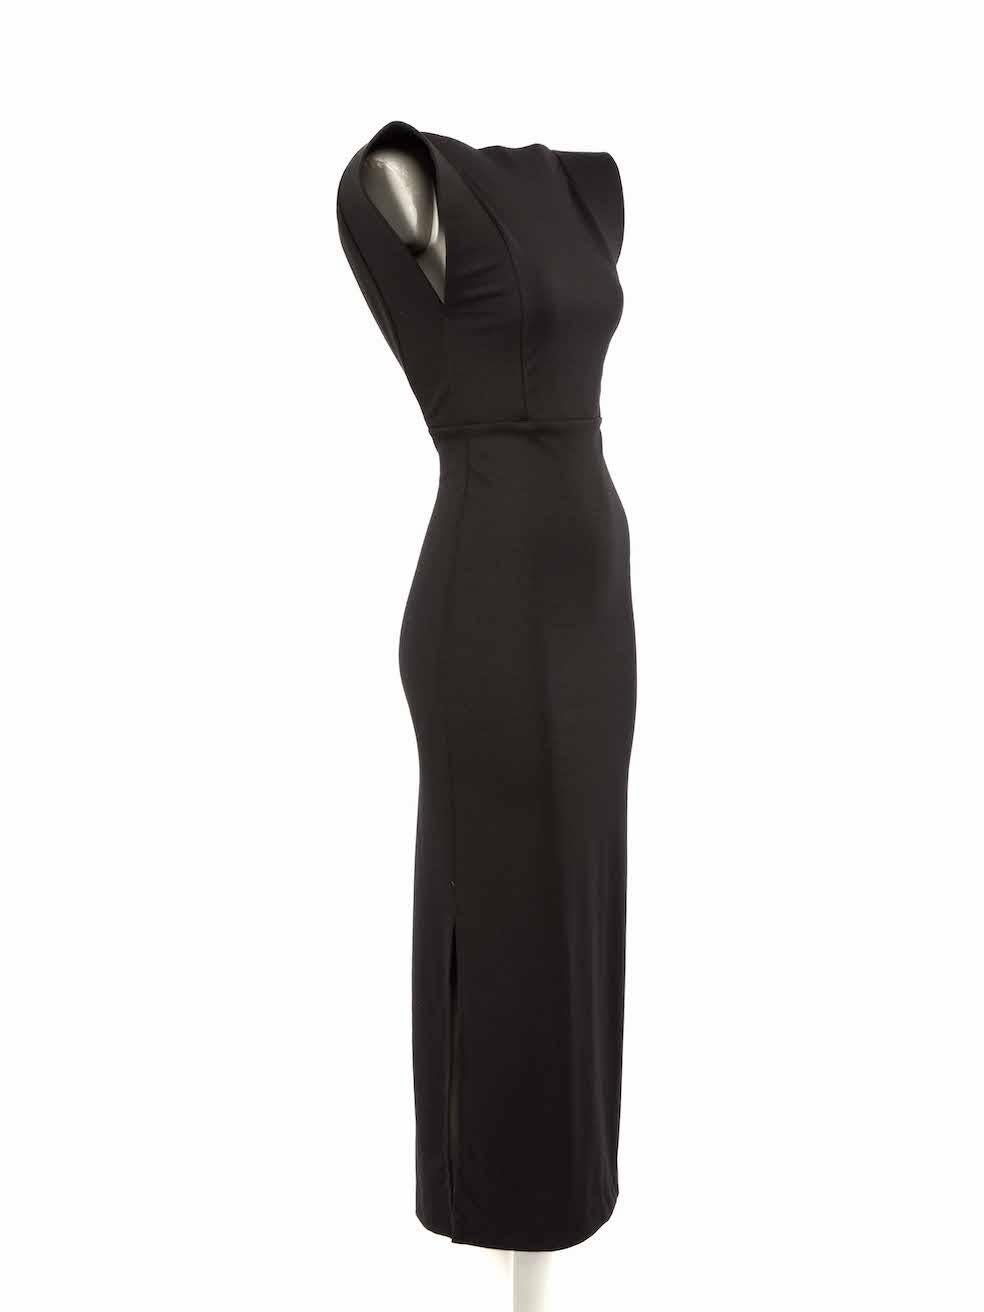 CONDITION is Very good. Minimal wear to dress is evident. Minimal wear to back hook where one side has detached, loose thread to back seam on this used Alexis designer resale item.
 
Details
Black
Polyester
Dress
Square neck
Sleeveless
Open